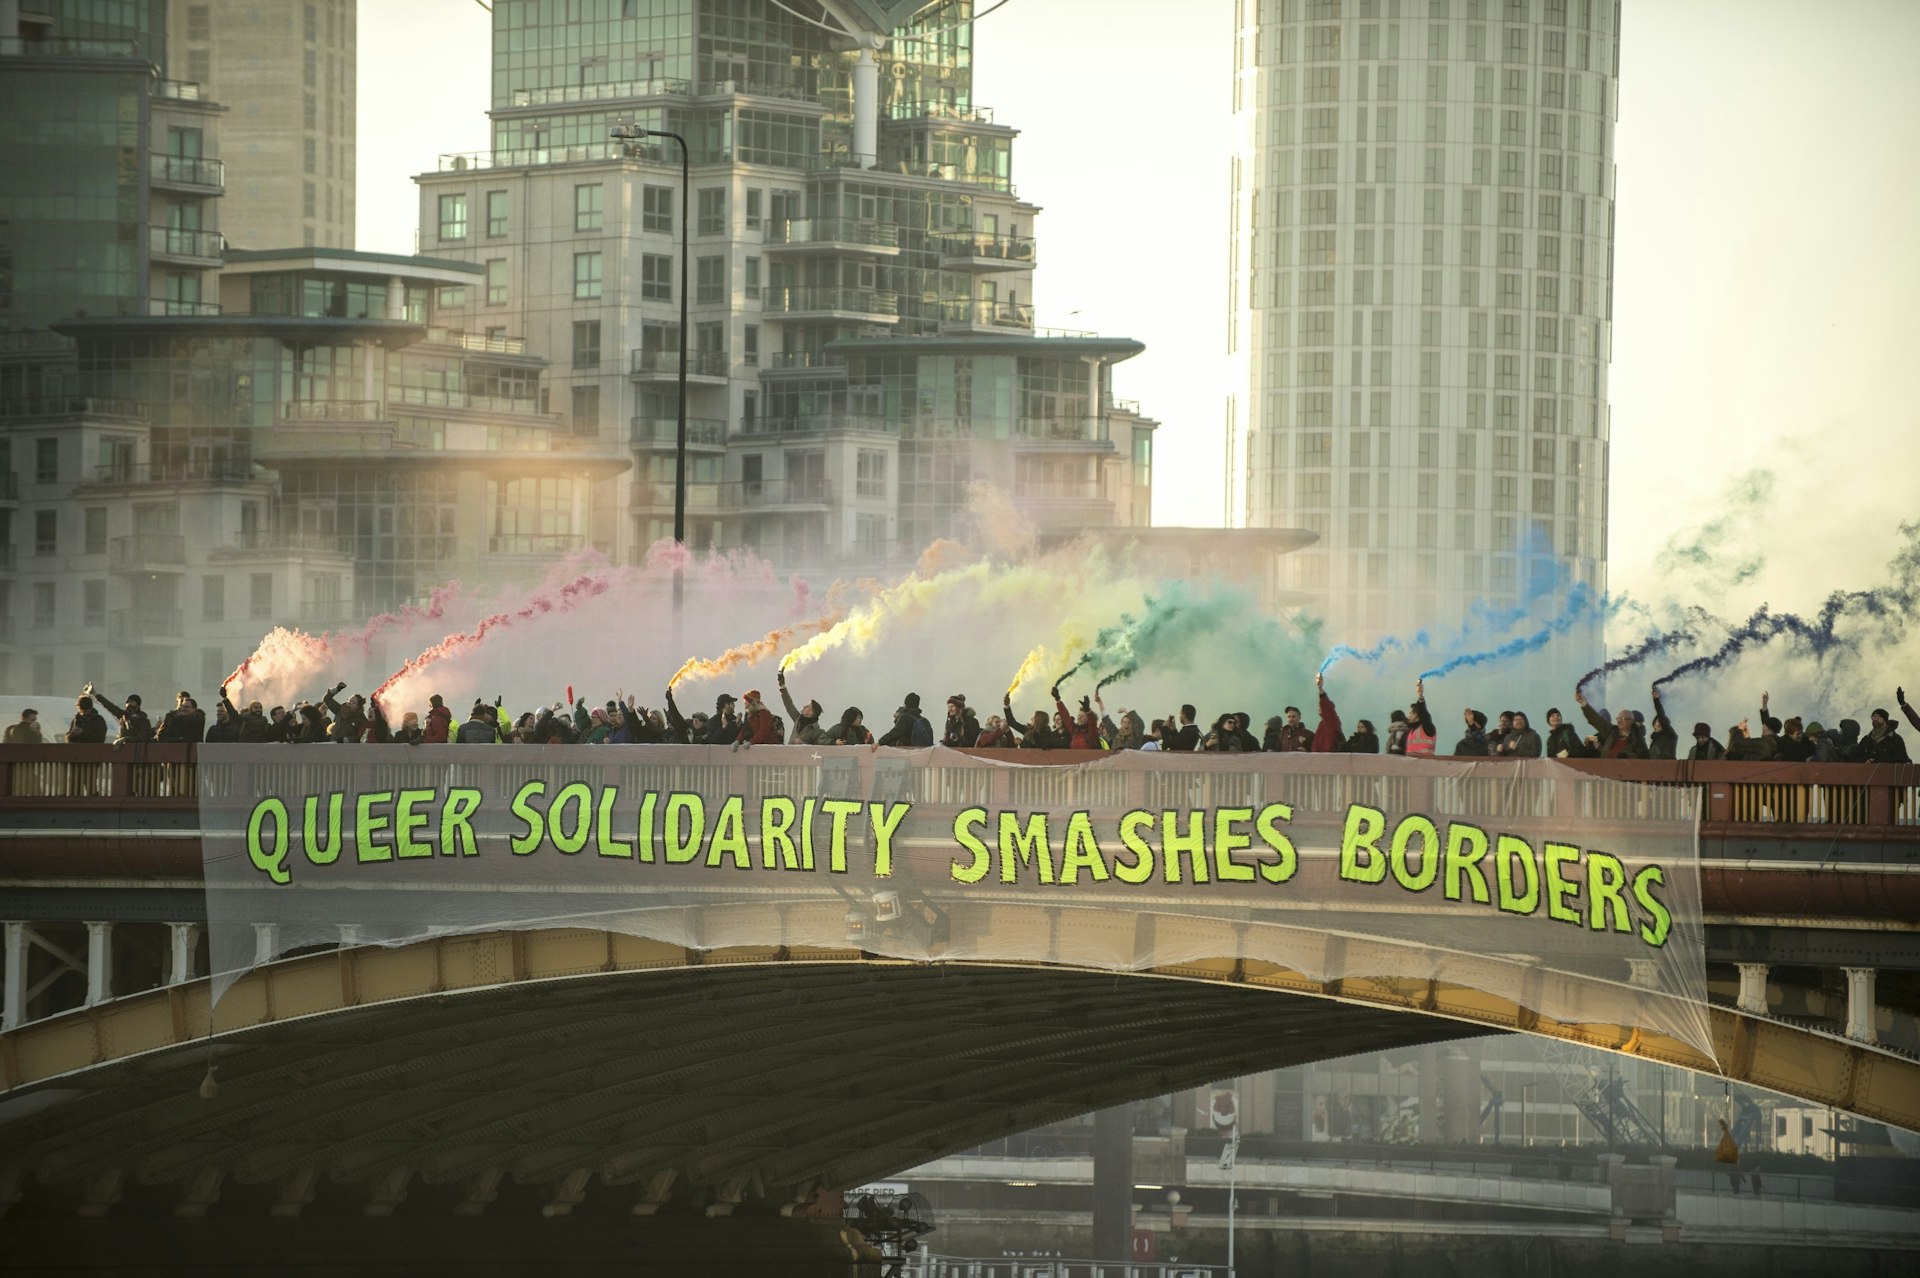 Bridges Not Walls: London stands united against Trump's inauguration